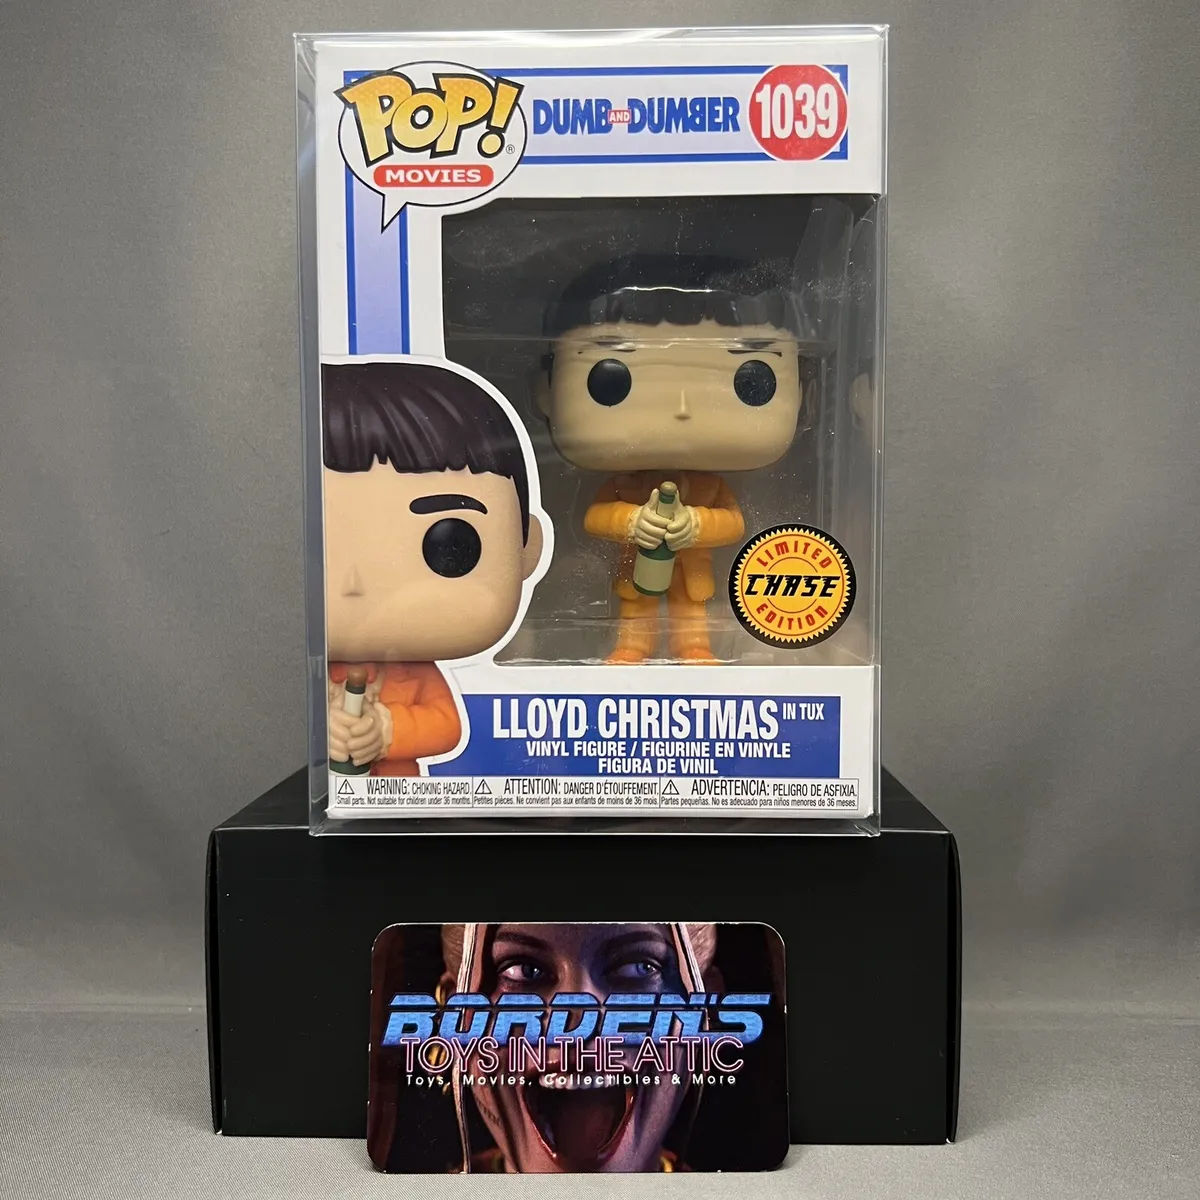 Funko pop dumb and dumber lloyd christmas chase figure with pop protector